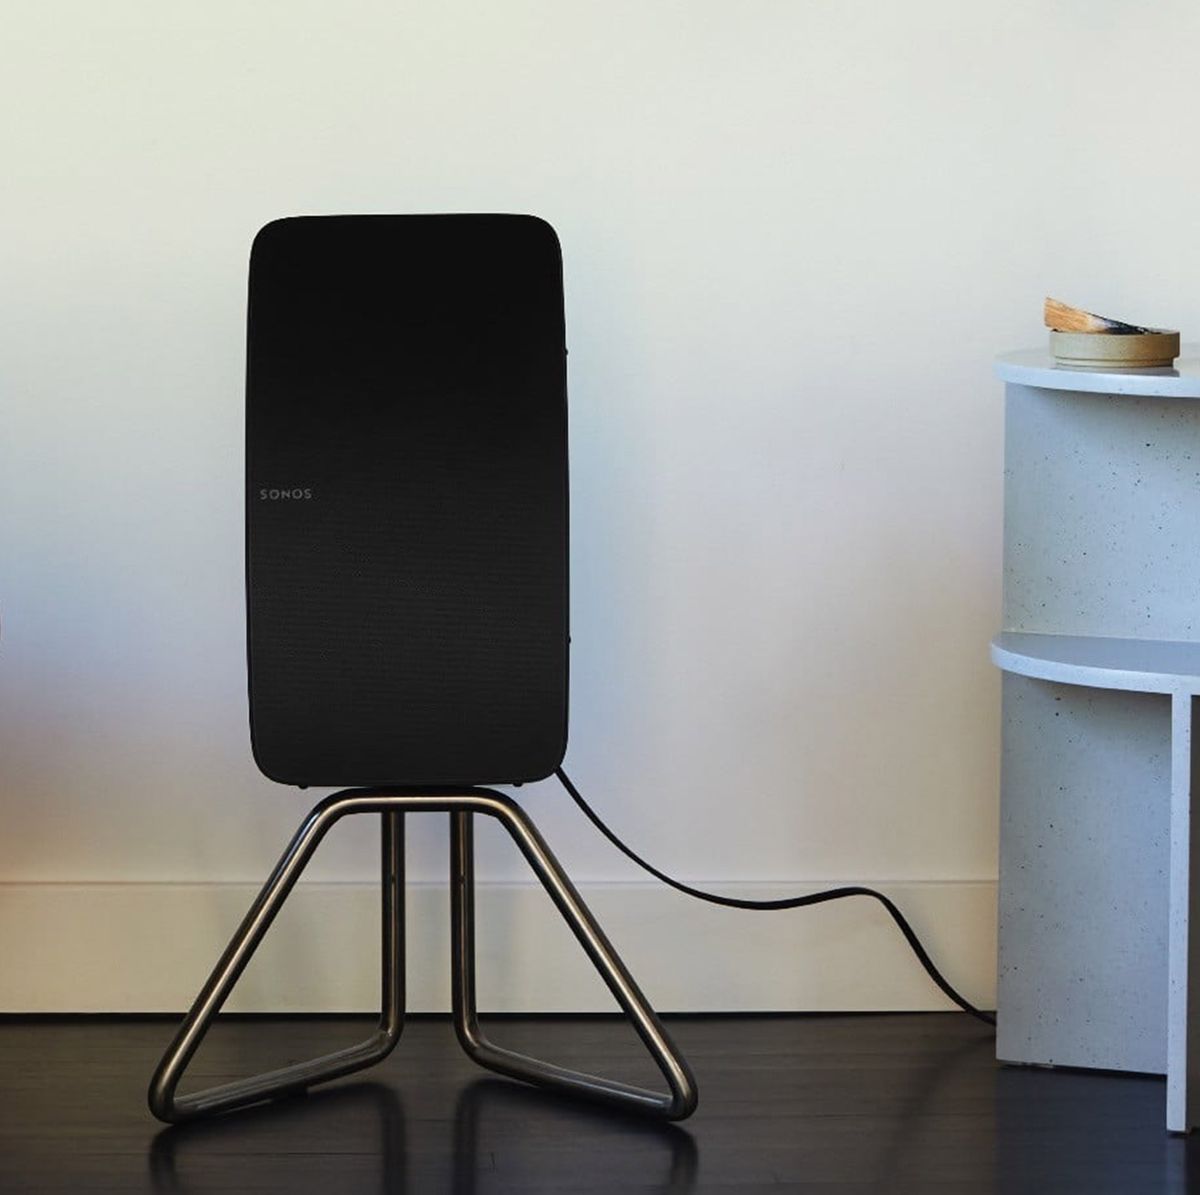 Overlevelse Bevis Parlament The Best Accessories Your Sonos Audio System Needs